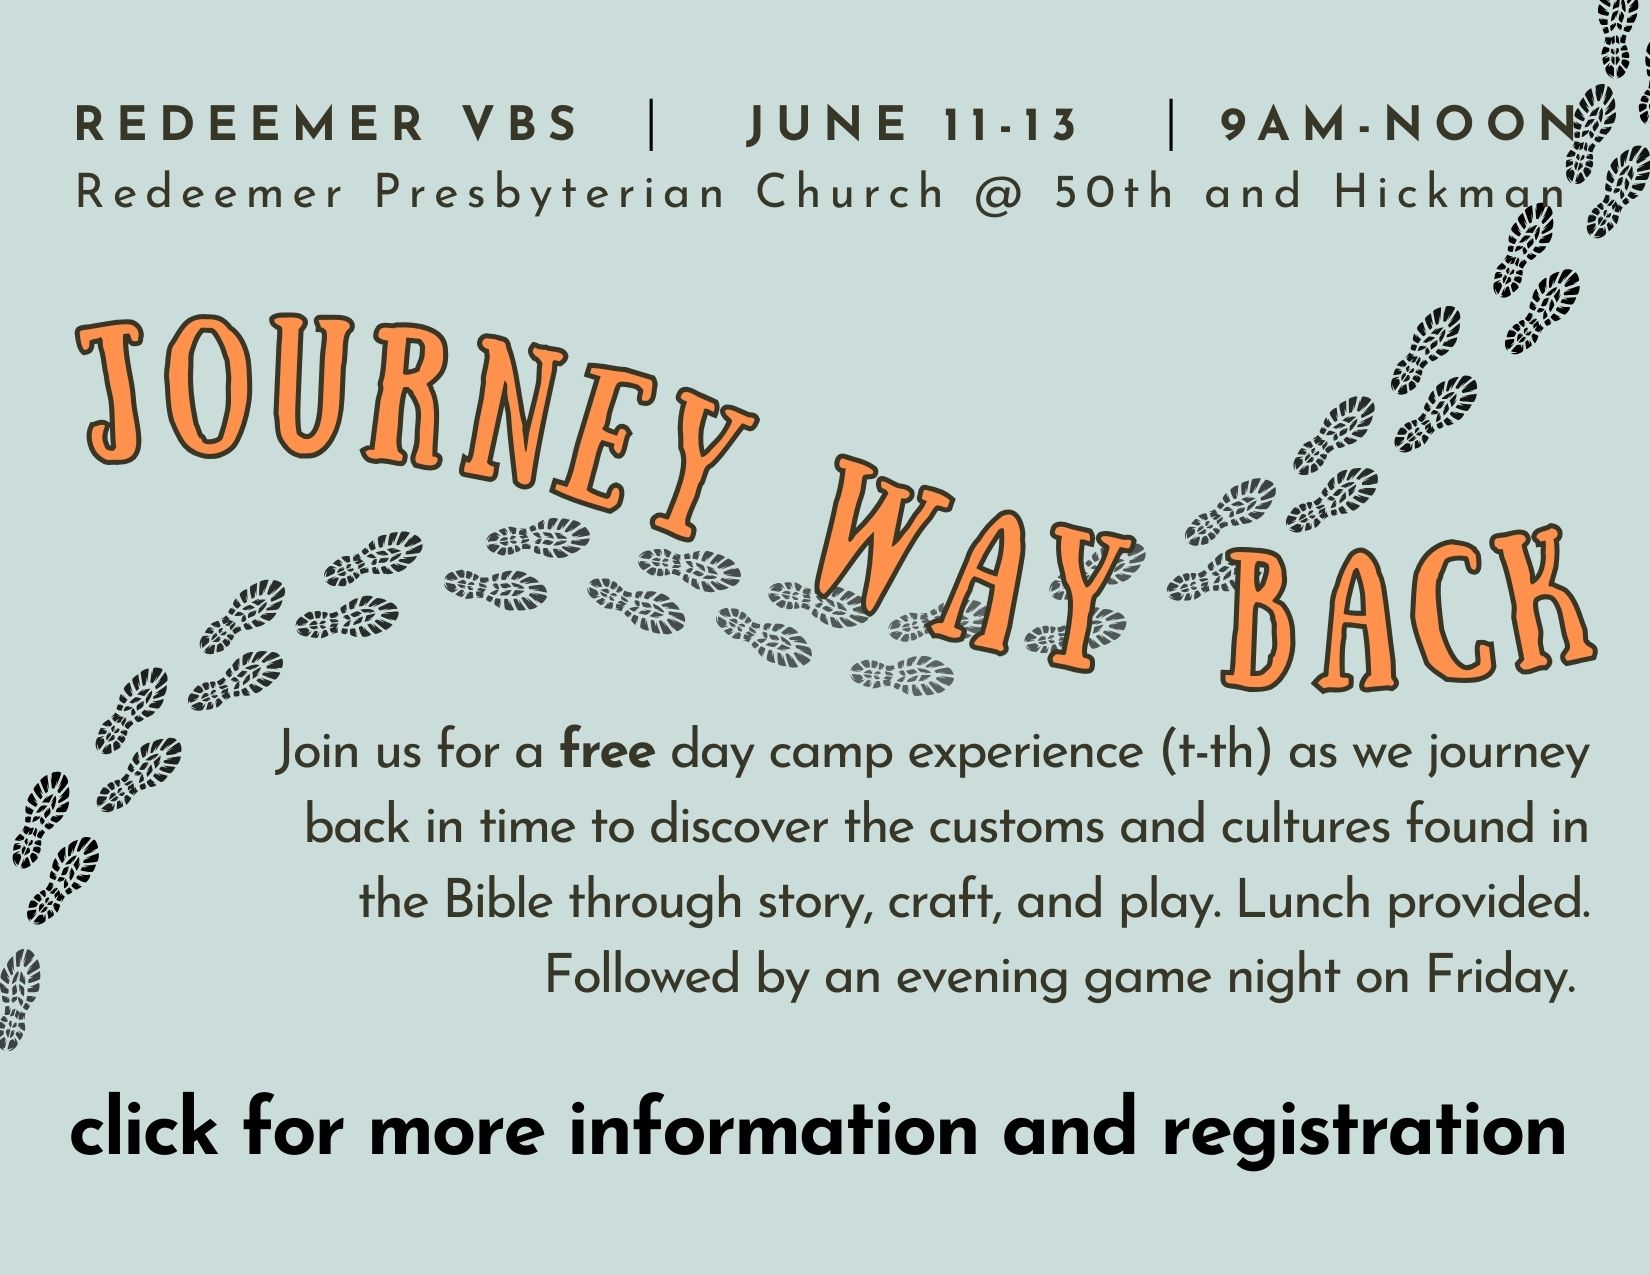 Vacation Bible school in Des Moines, Iowa. Ready for adventure? Join us at Redeemer Church as we journey back in time to discover the customs and cultures found in the Bible through story, craft, and play. Free. Lunch provided. June 11-13. 9am til noon.